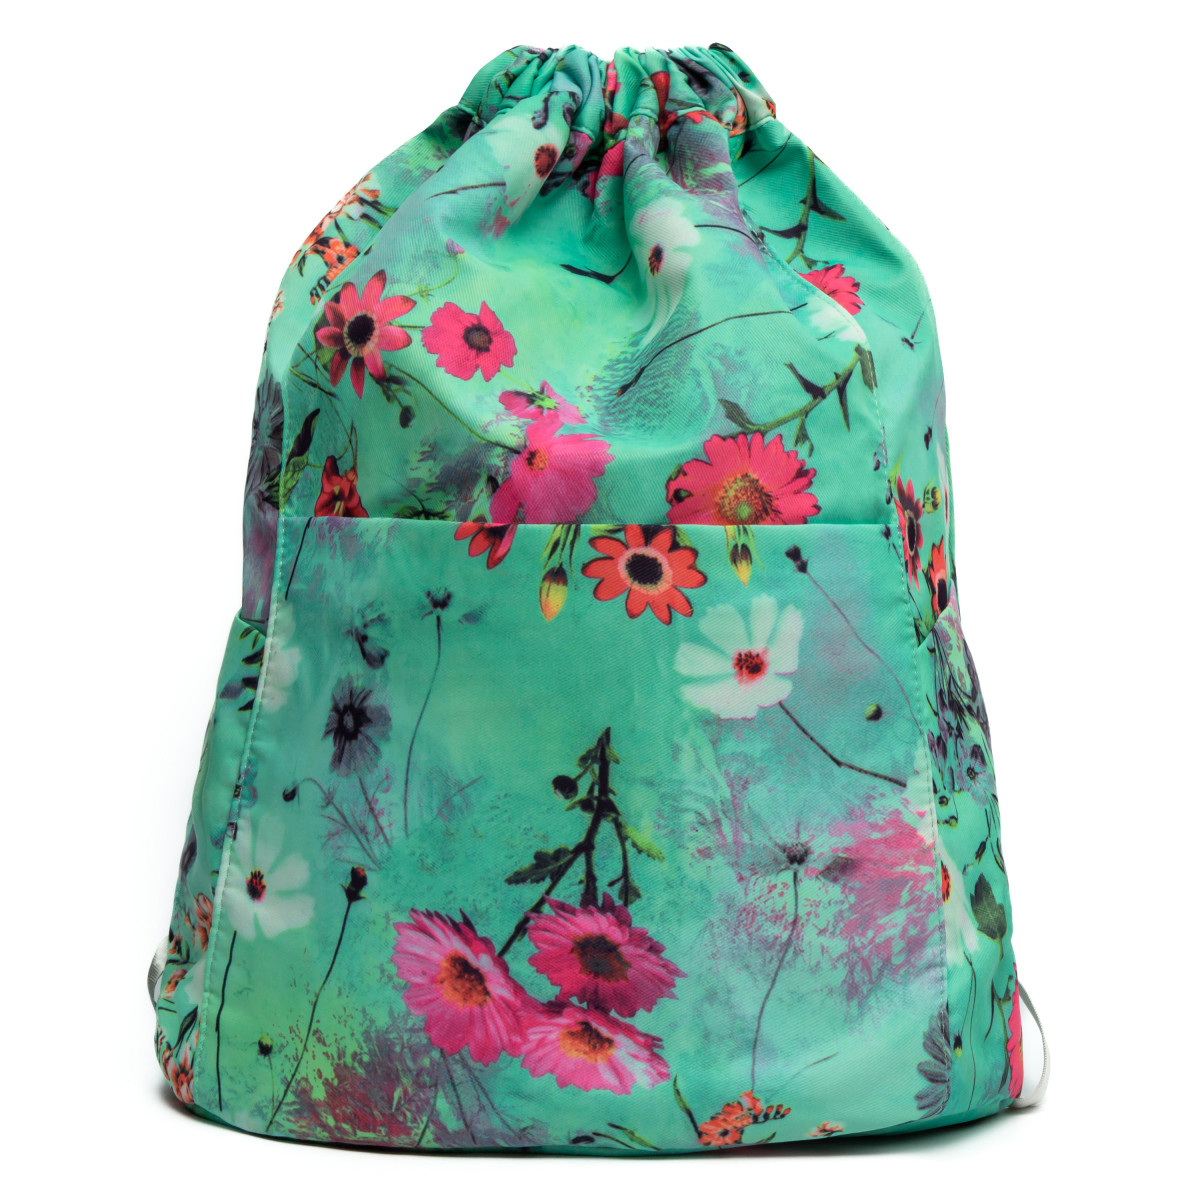 Backpack Daypack, Daisy